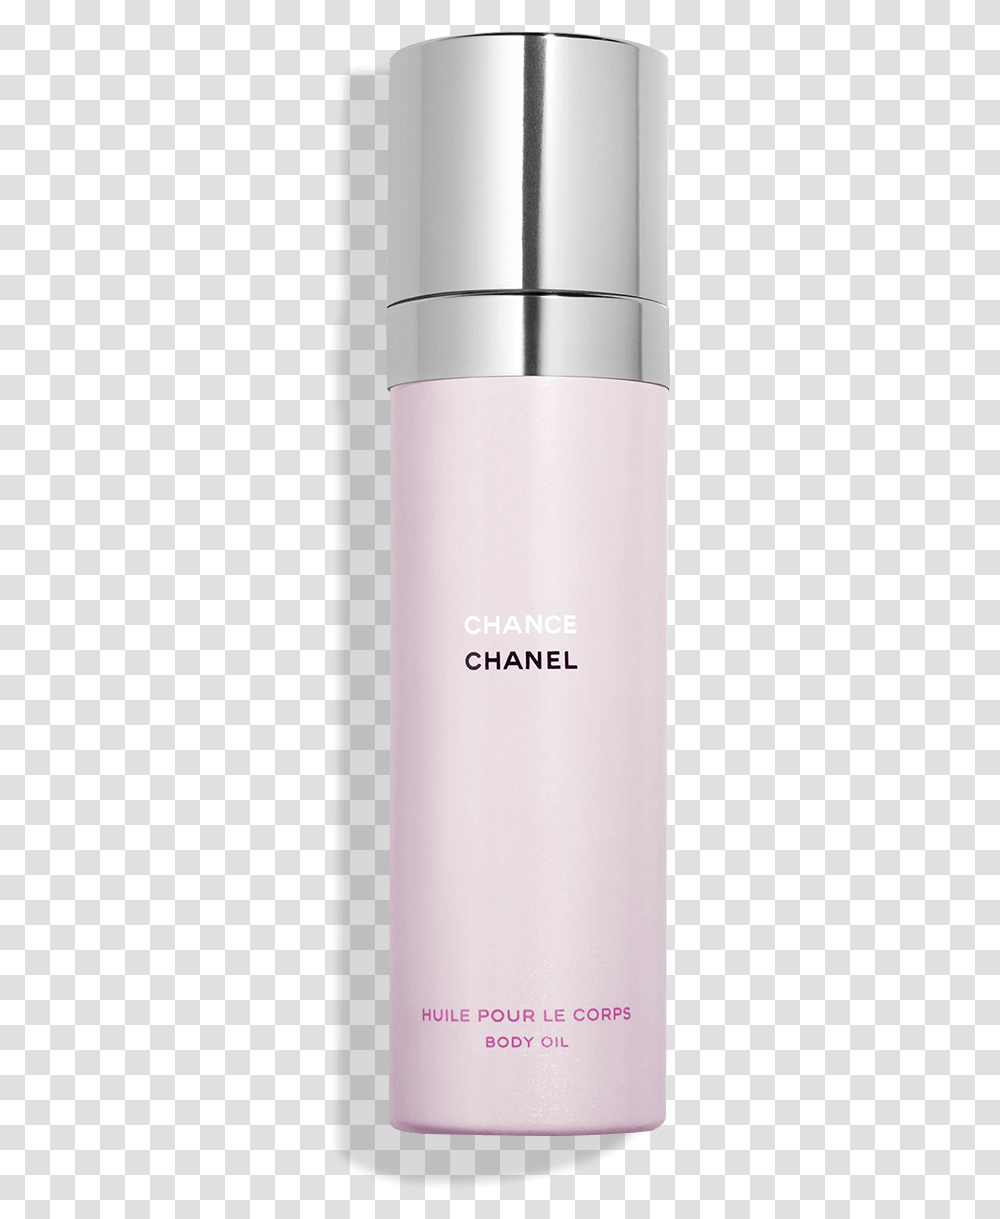 Clip Art Chance Official Site A Chanel Chance Body Oil Spray, Shaker, Bottle, Aluminium, Can Transparent Png